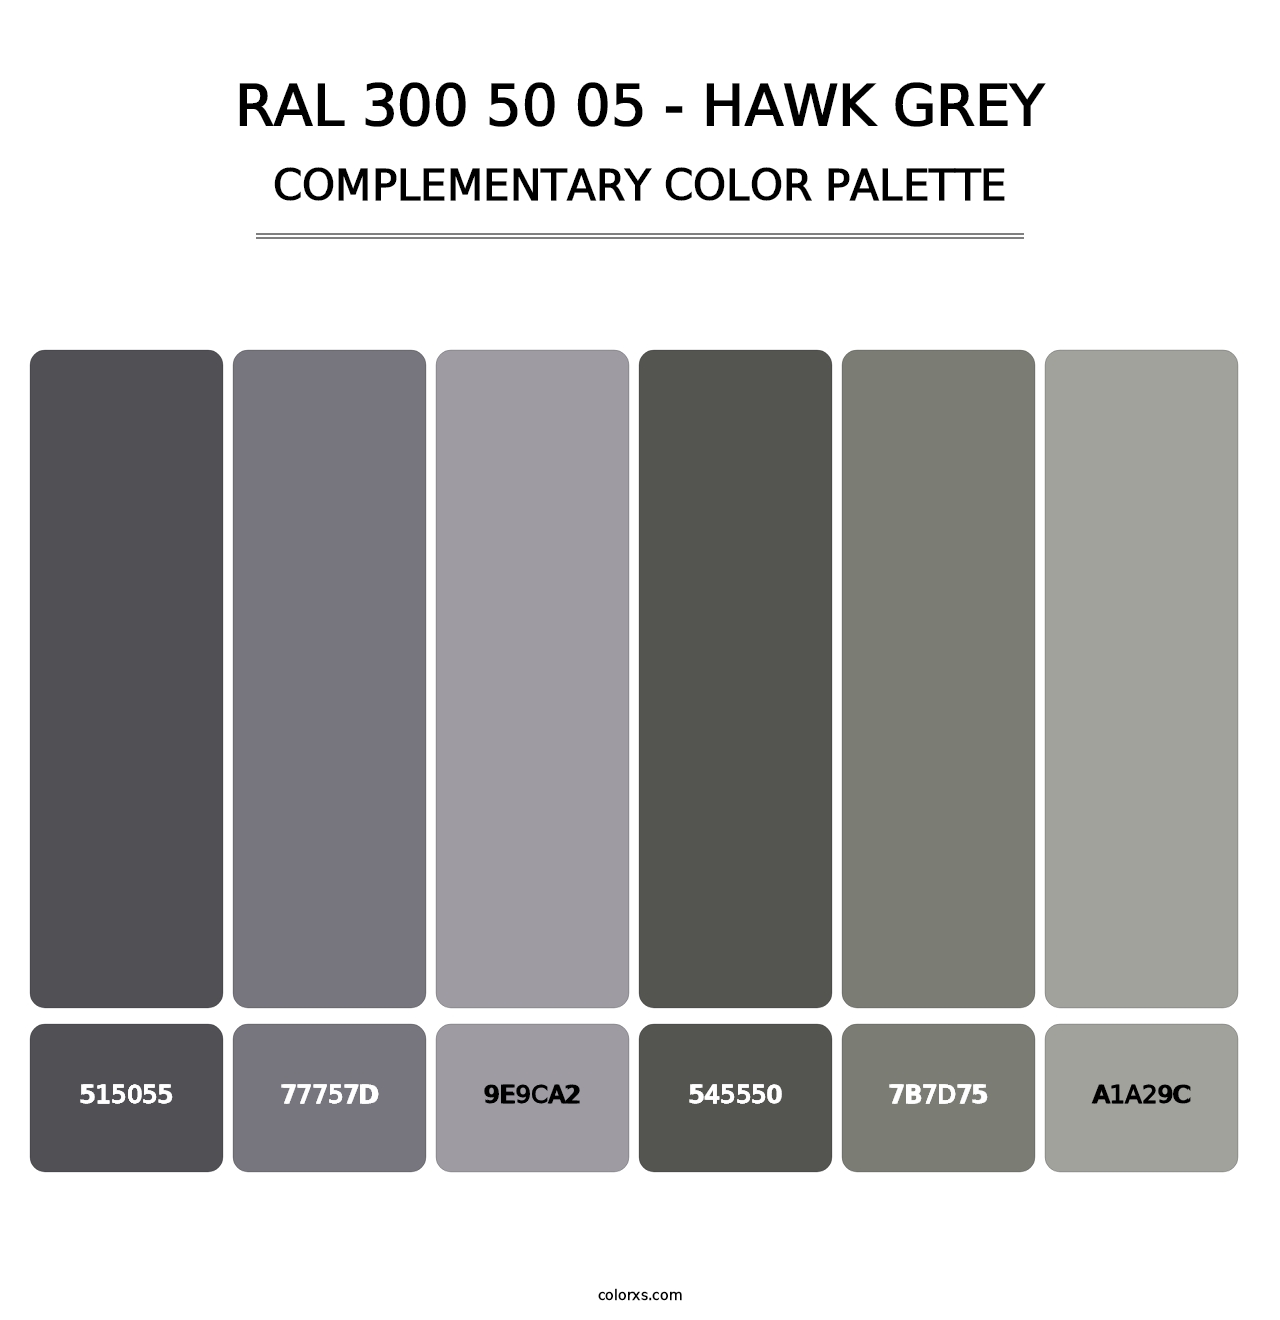 RAL 300 50 05 - Hawk Grey - Complementary Color Palette